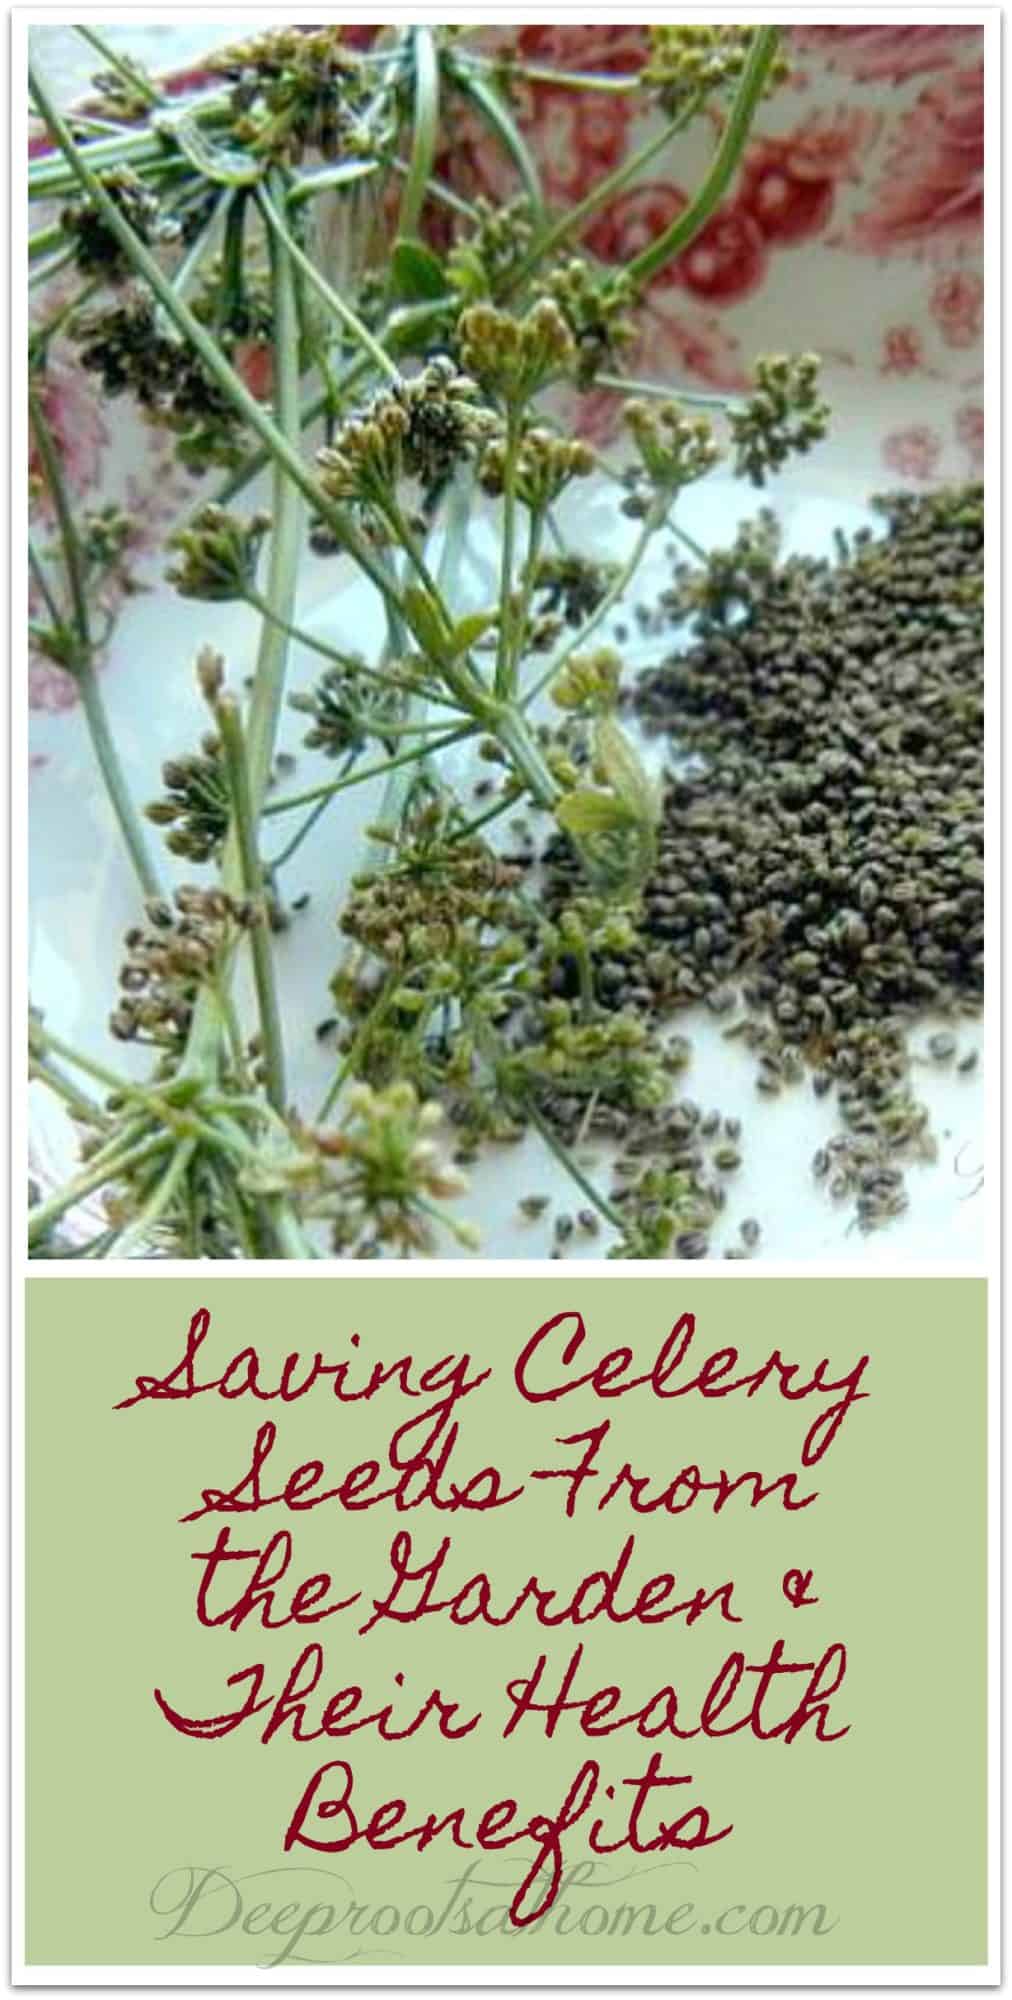 Saving Celery Seeds From the Garden & Their Health Benefits. pinterest image